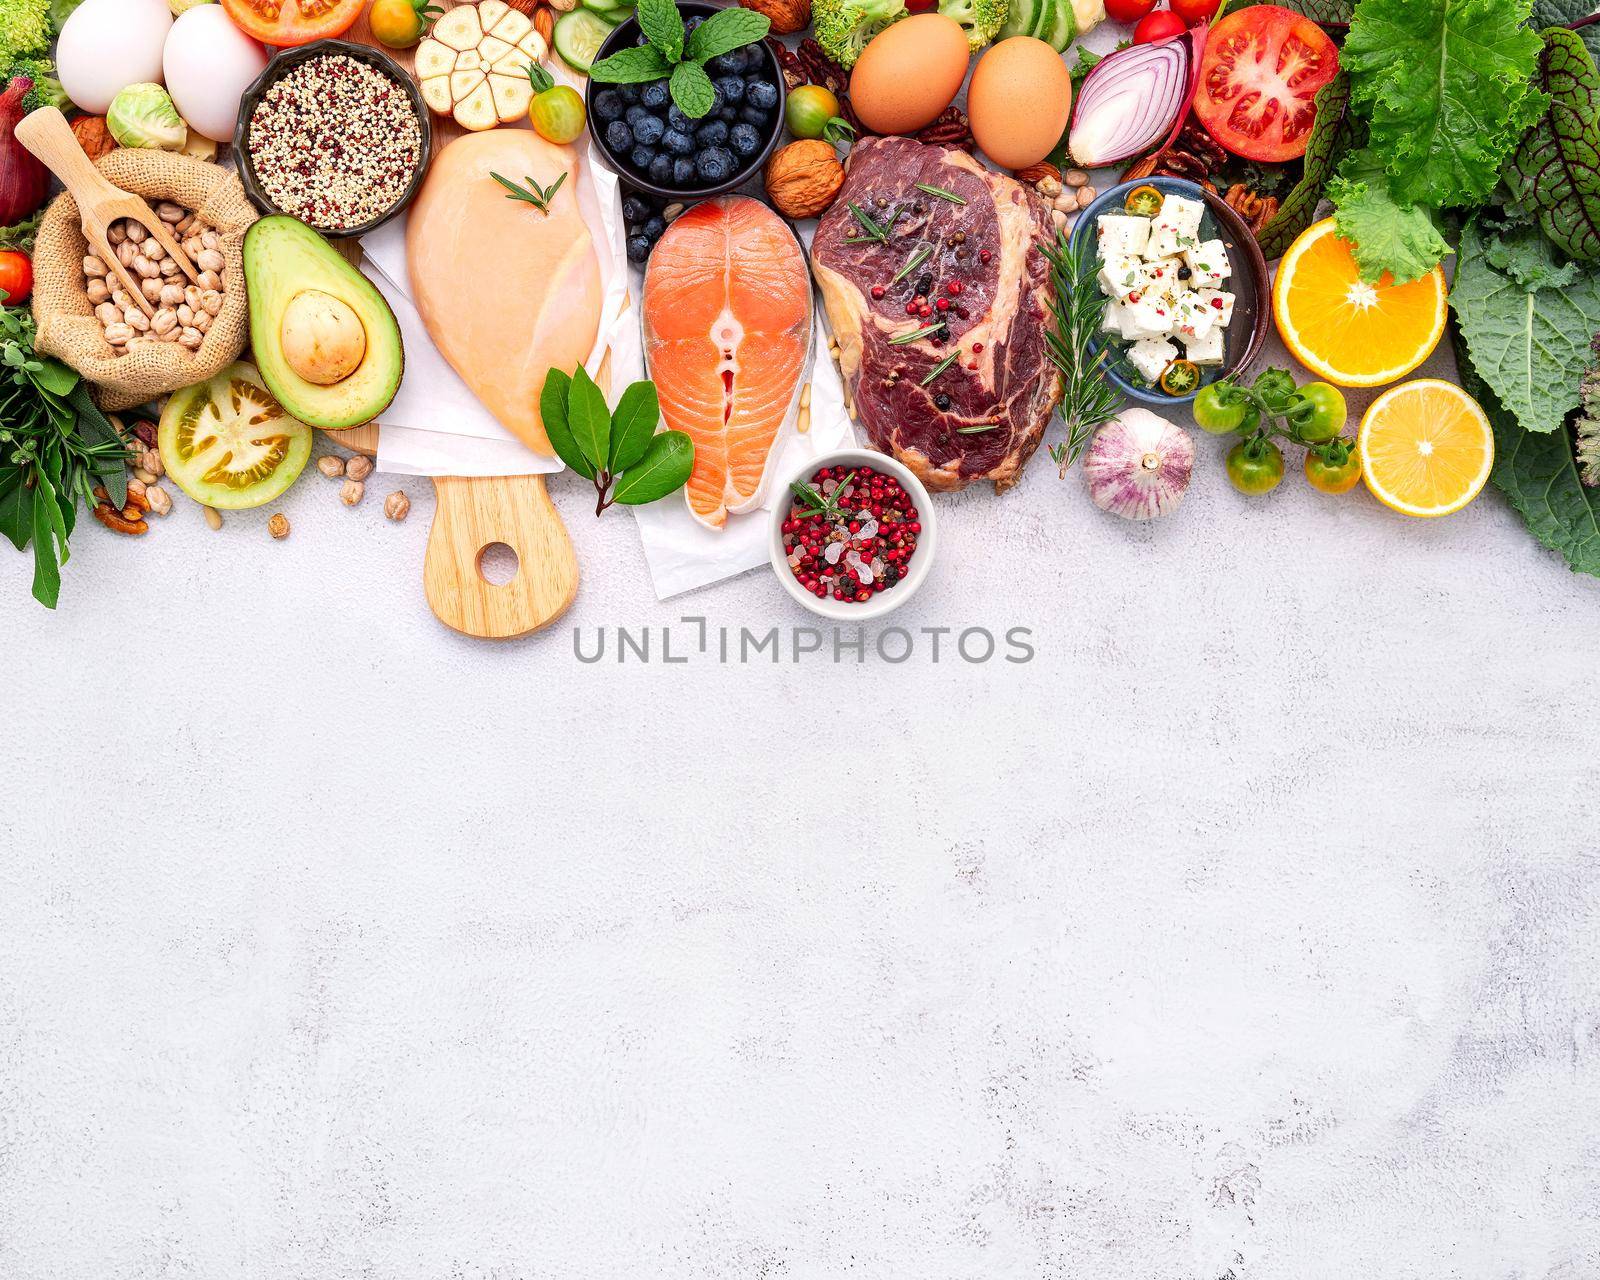 Ketogenic low carbs diet concept. Ingredients for healthy foods selection set up on white concrete background.